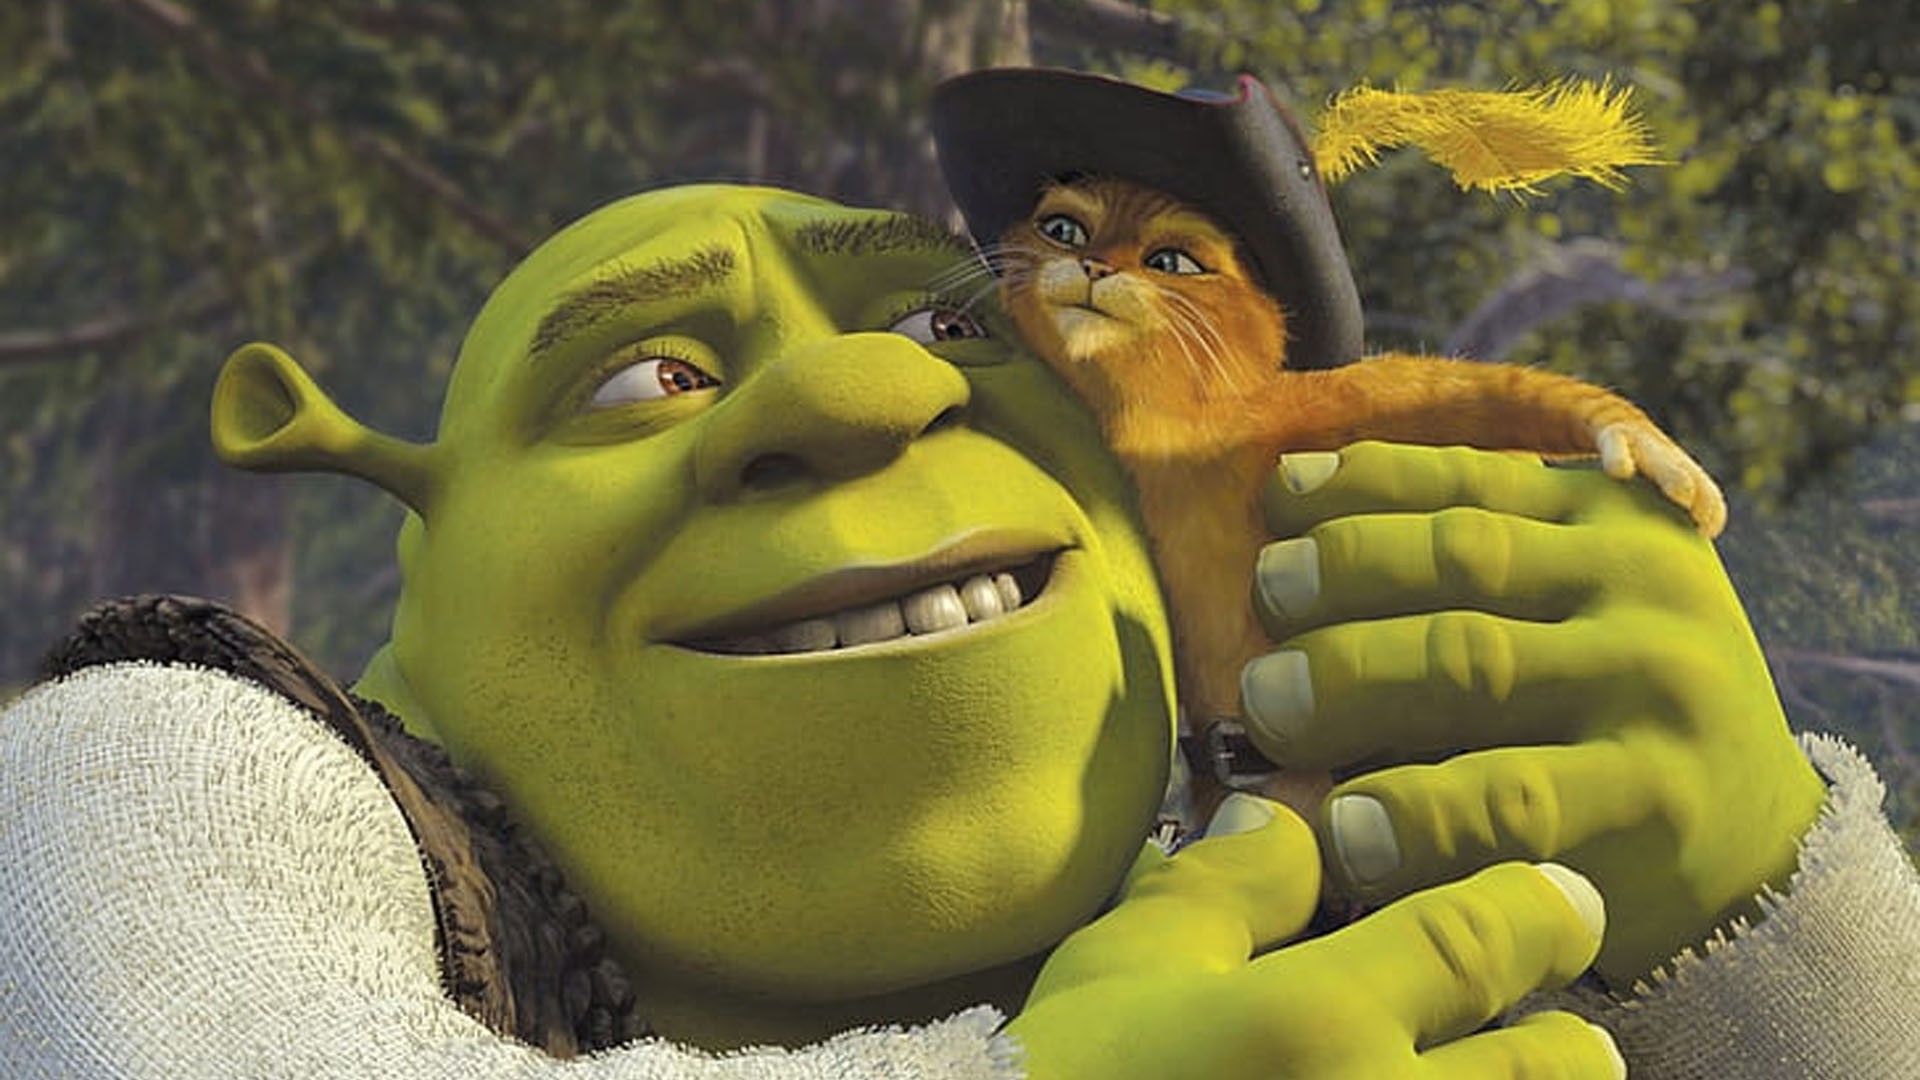 Wallpaper Shrek with Puss in boots